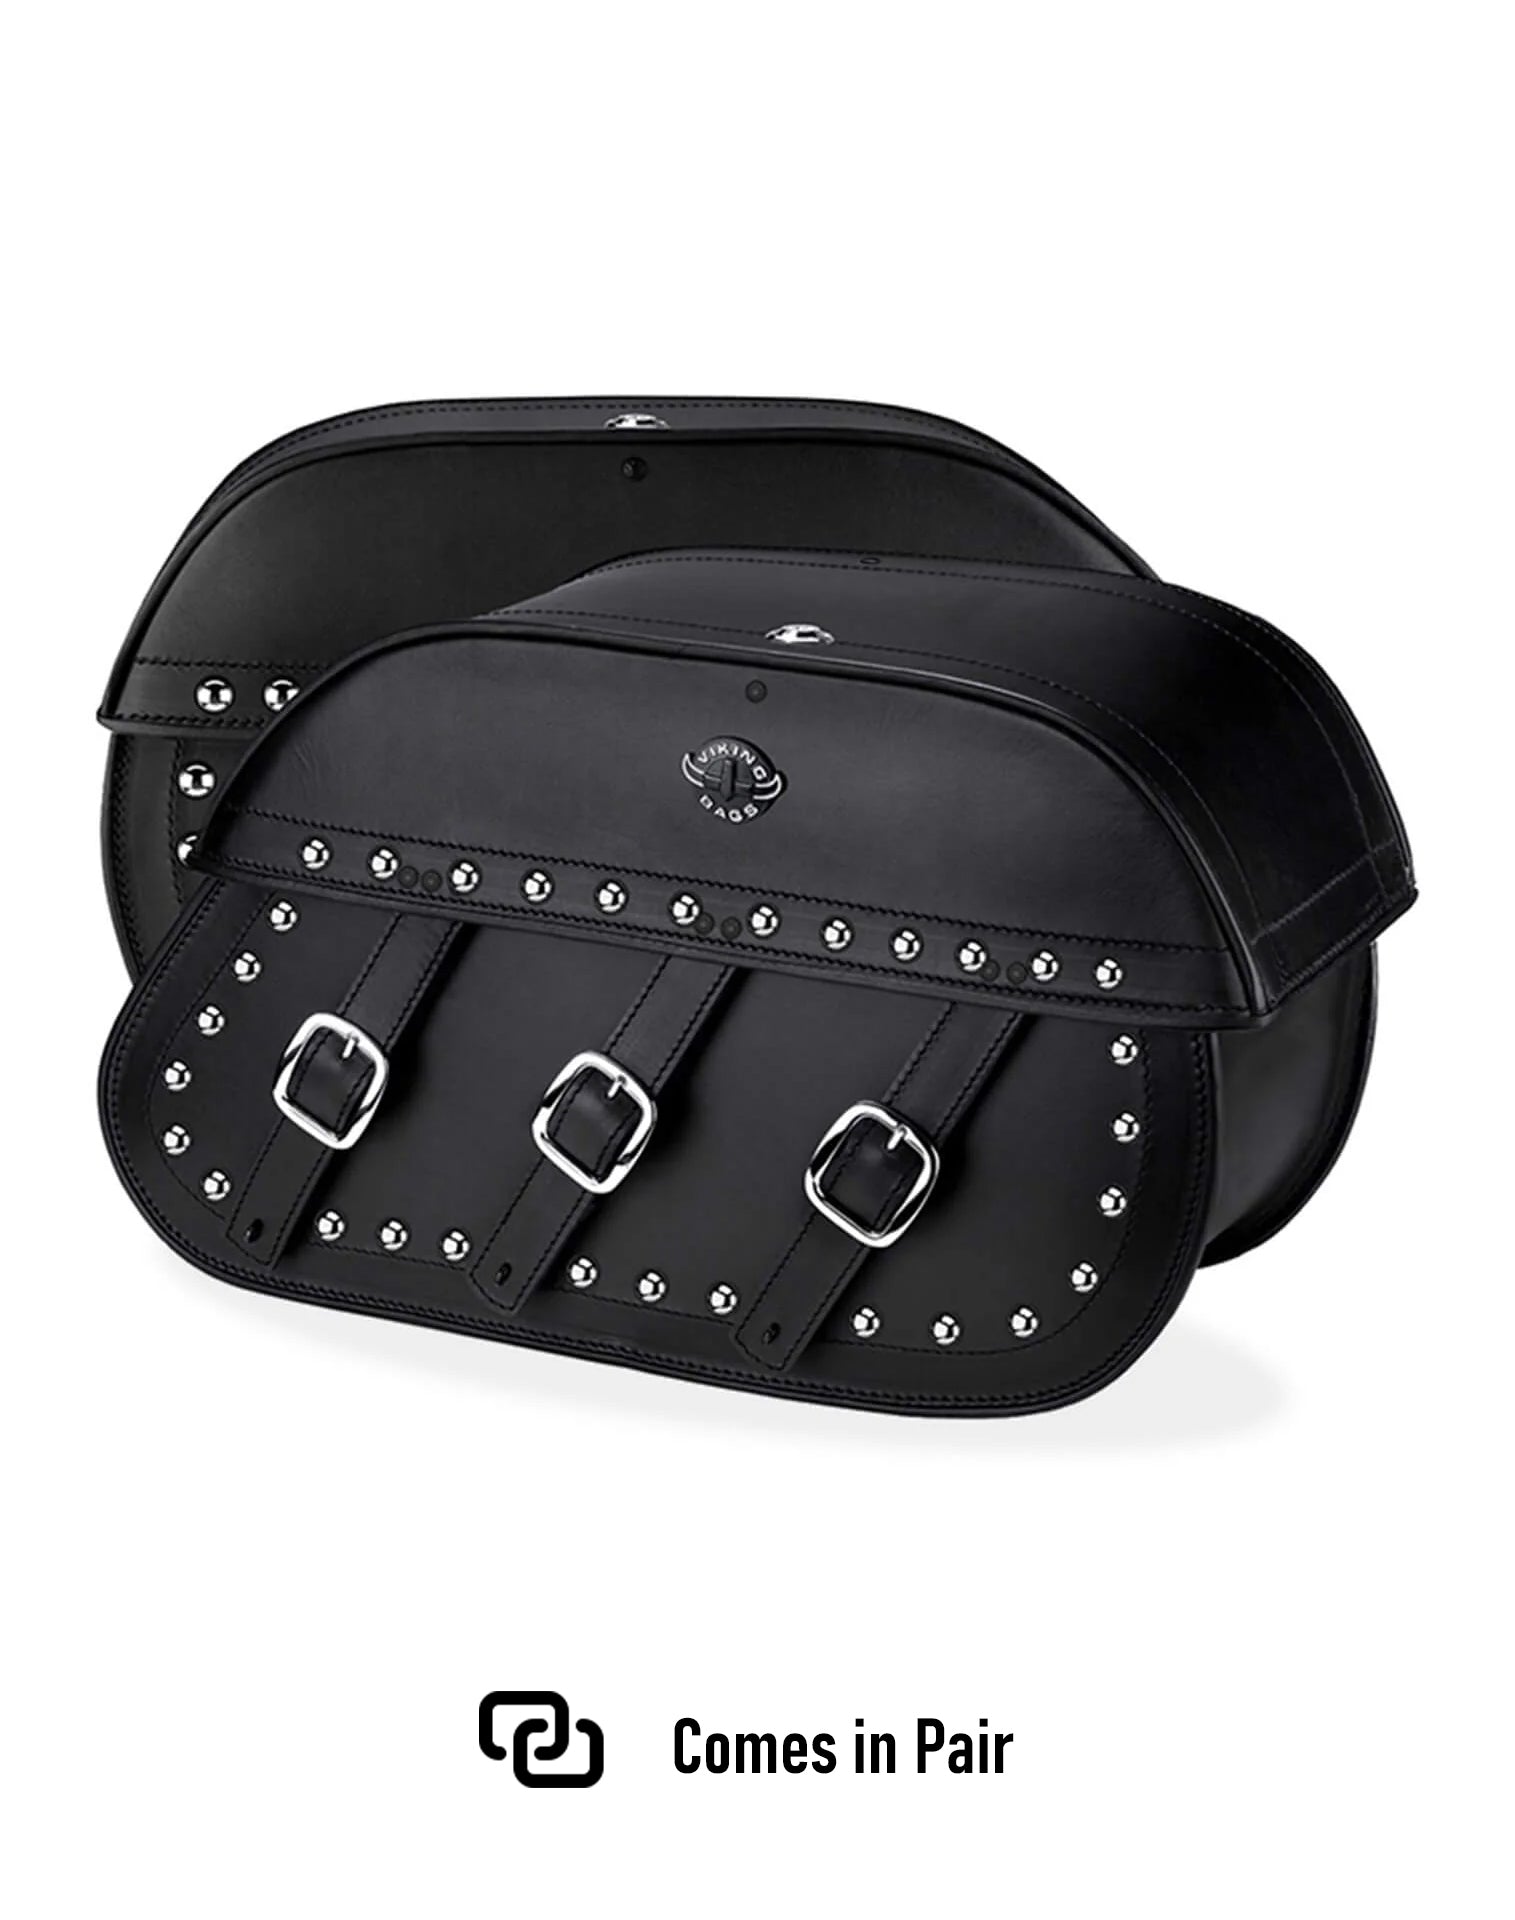 Viking Trianon Extra Large Honda Vtx 1800 N Studded Leather Motorcycle Saddlebags Weather Resistant Bags Comes in Pair